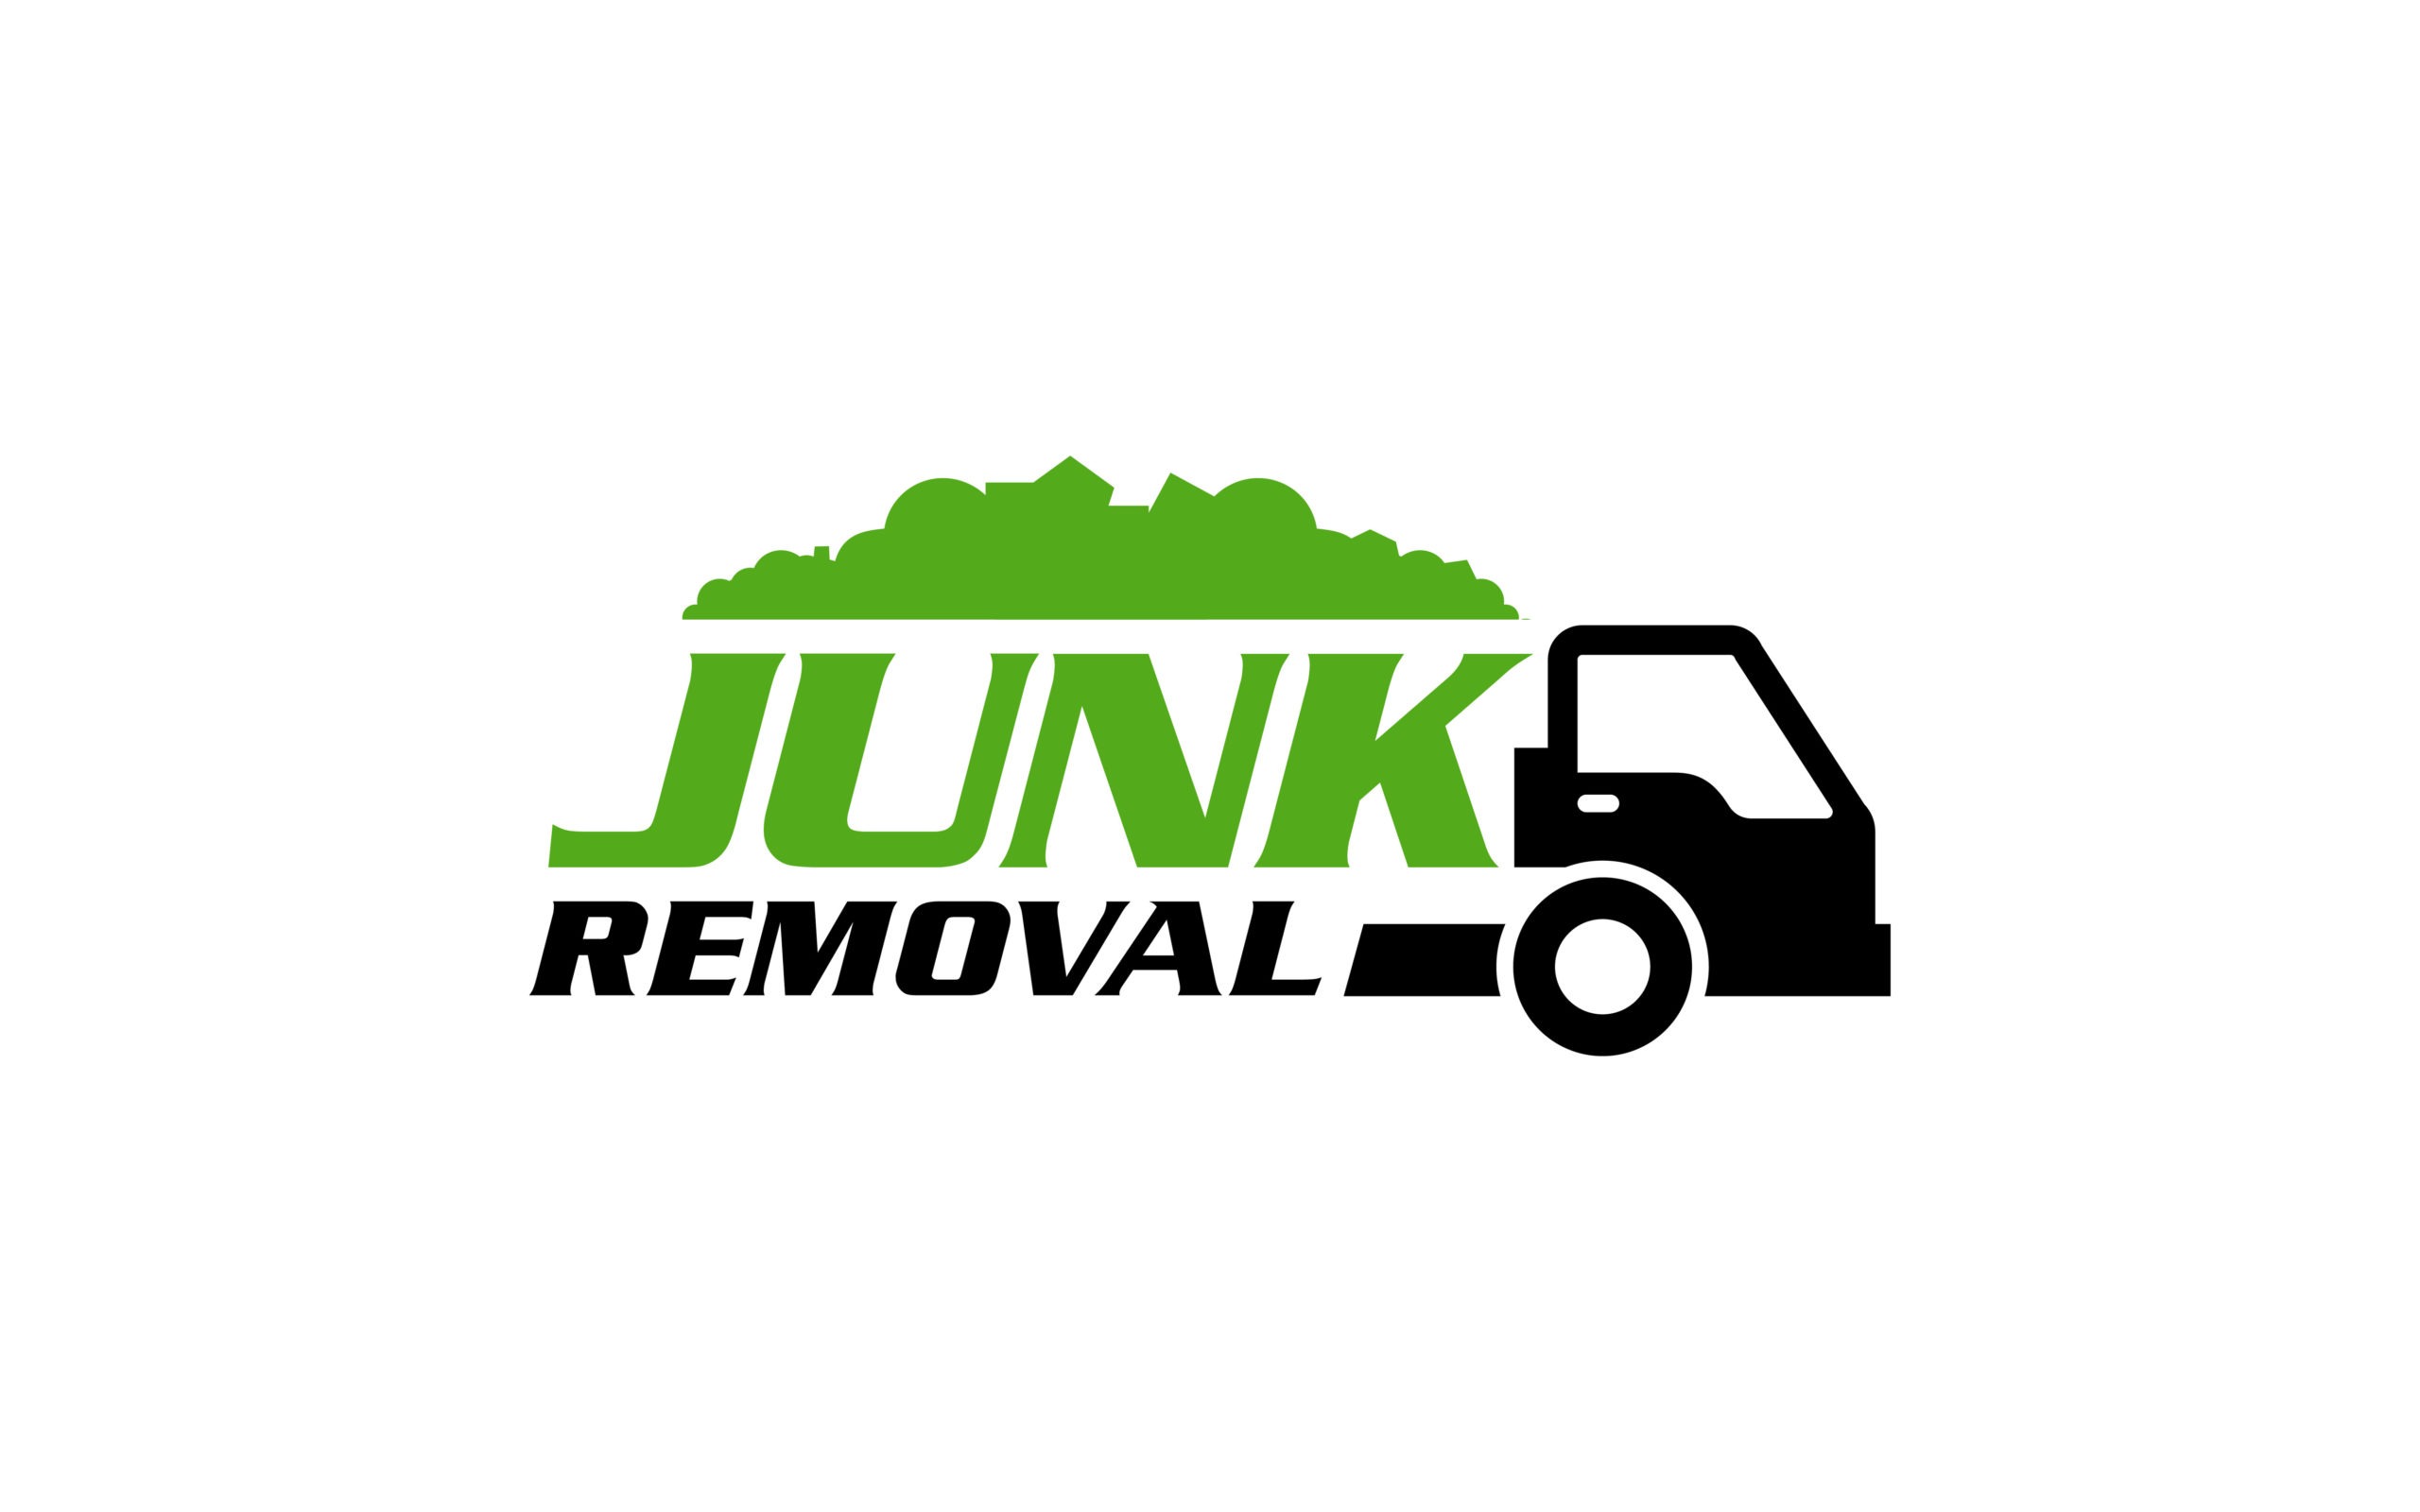 Illustration vector graphic of junk removal solution services lo